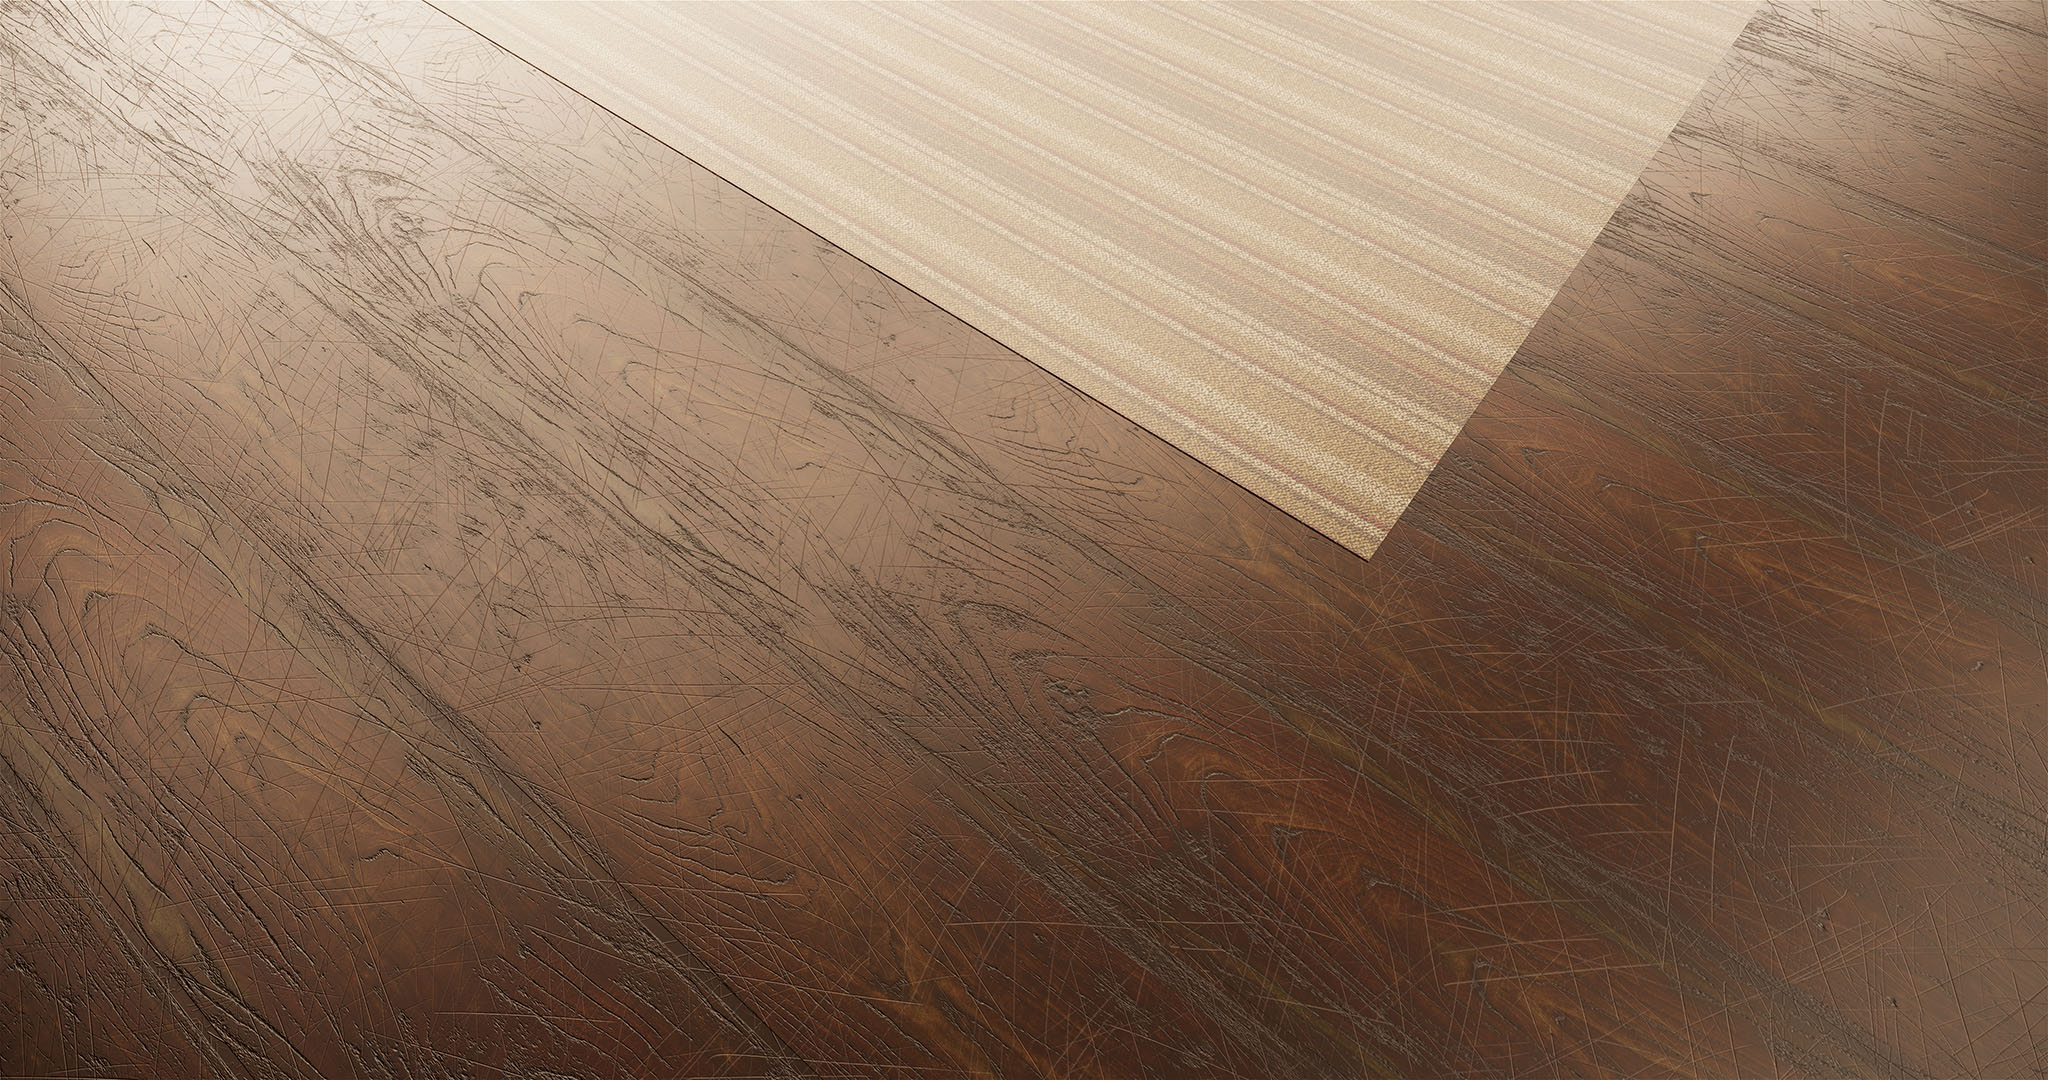 Walnut floor material with scratches